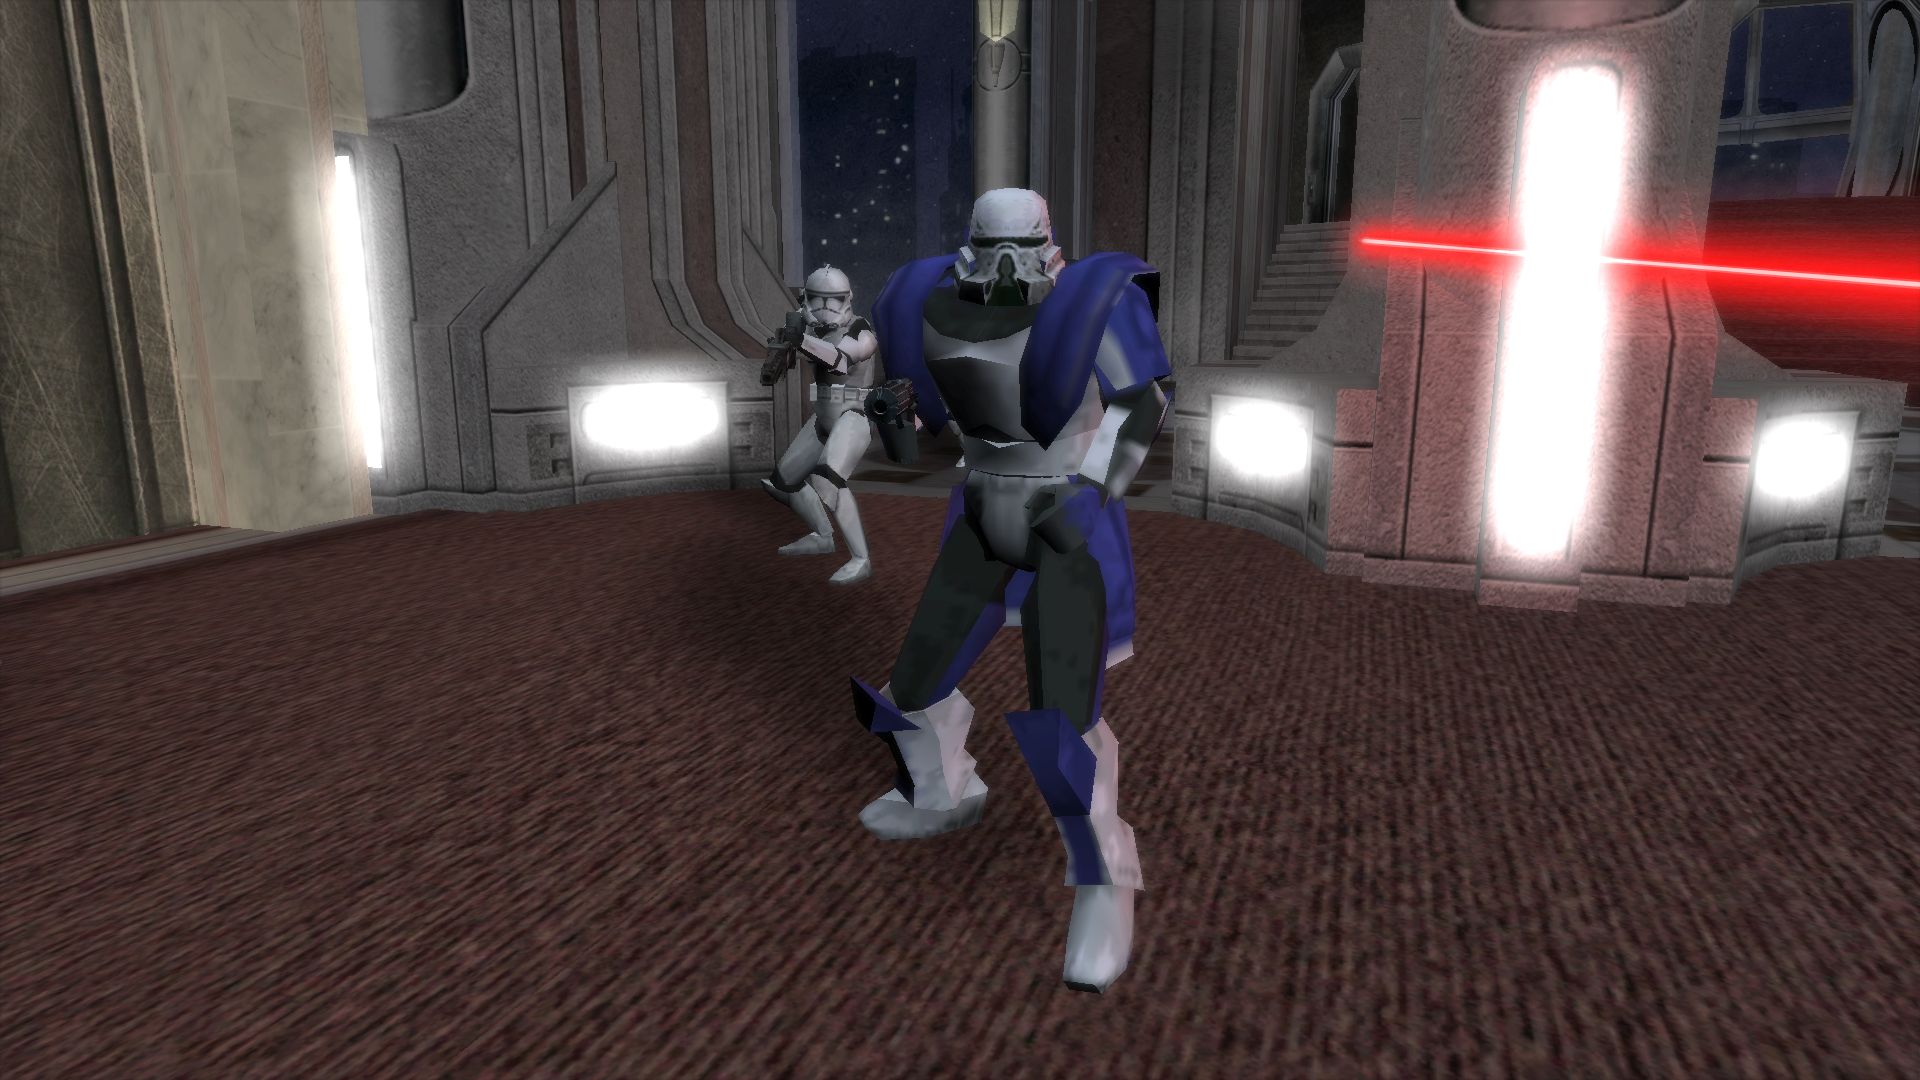 Probably first time MEC Trooper in BF2 image Squadron mod for Star Wars Battlefront II